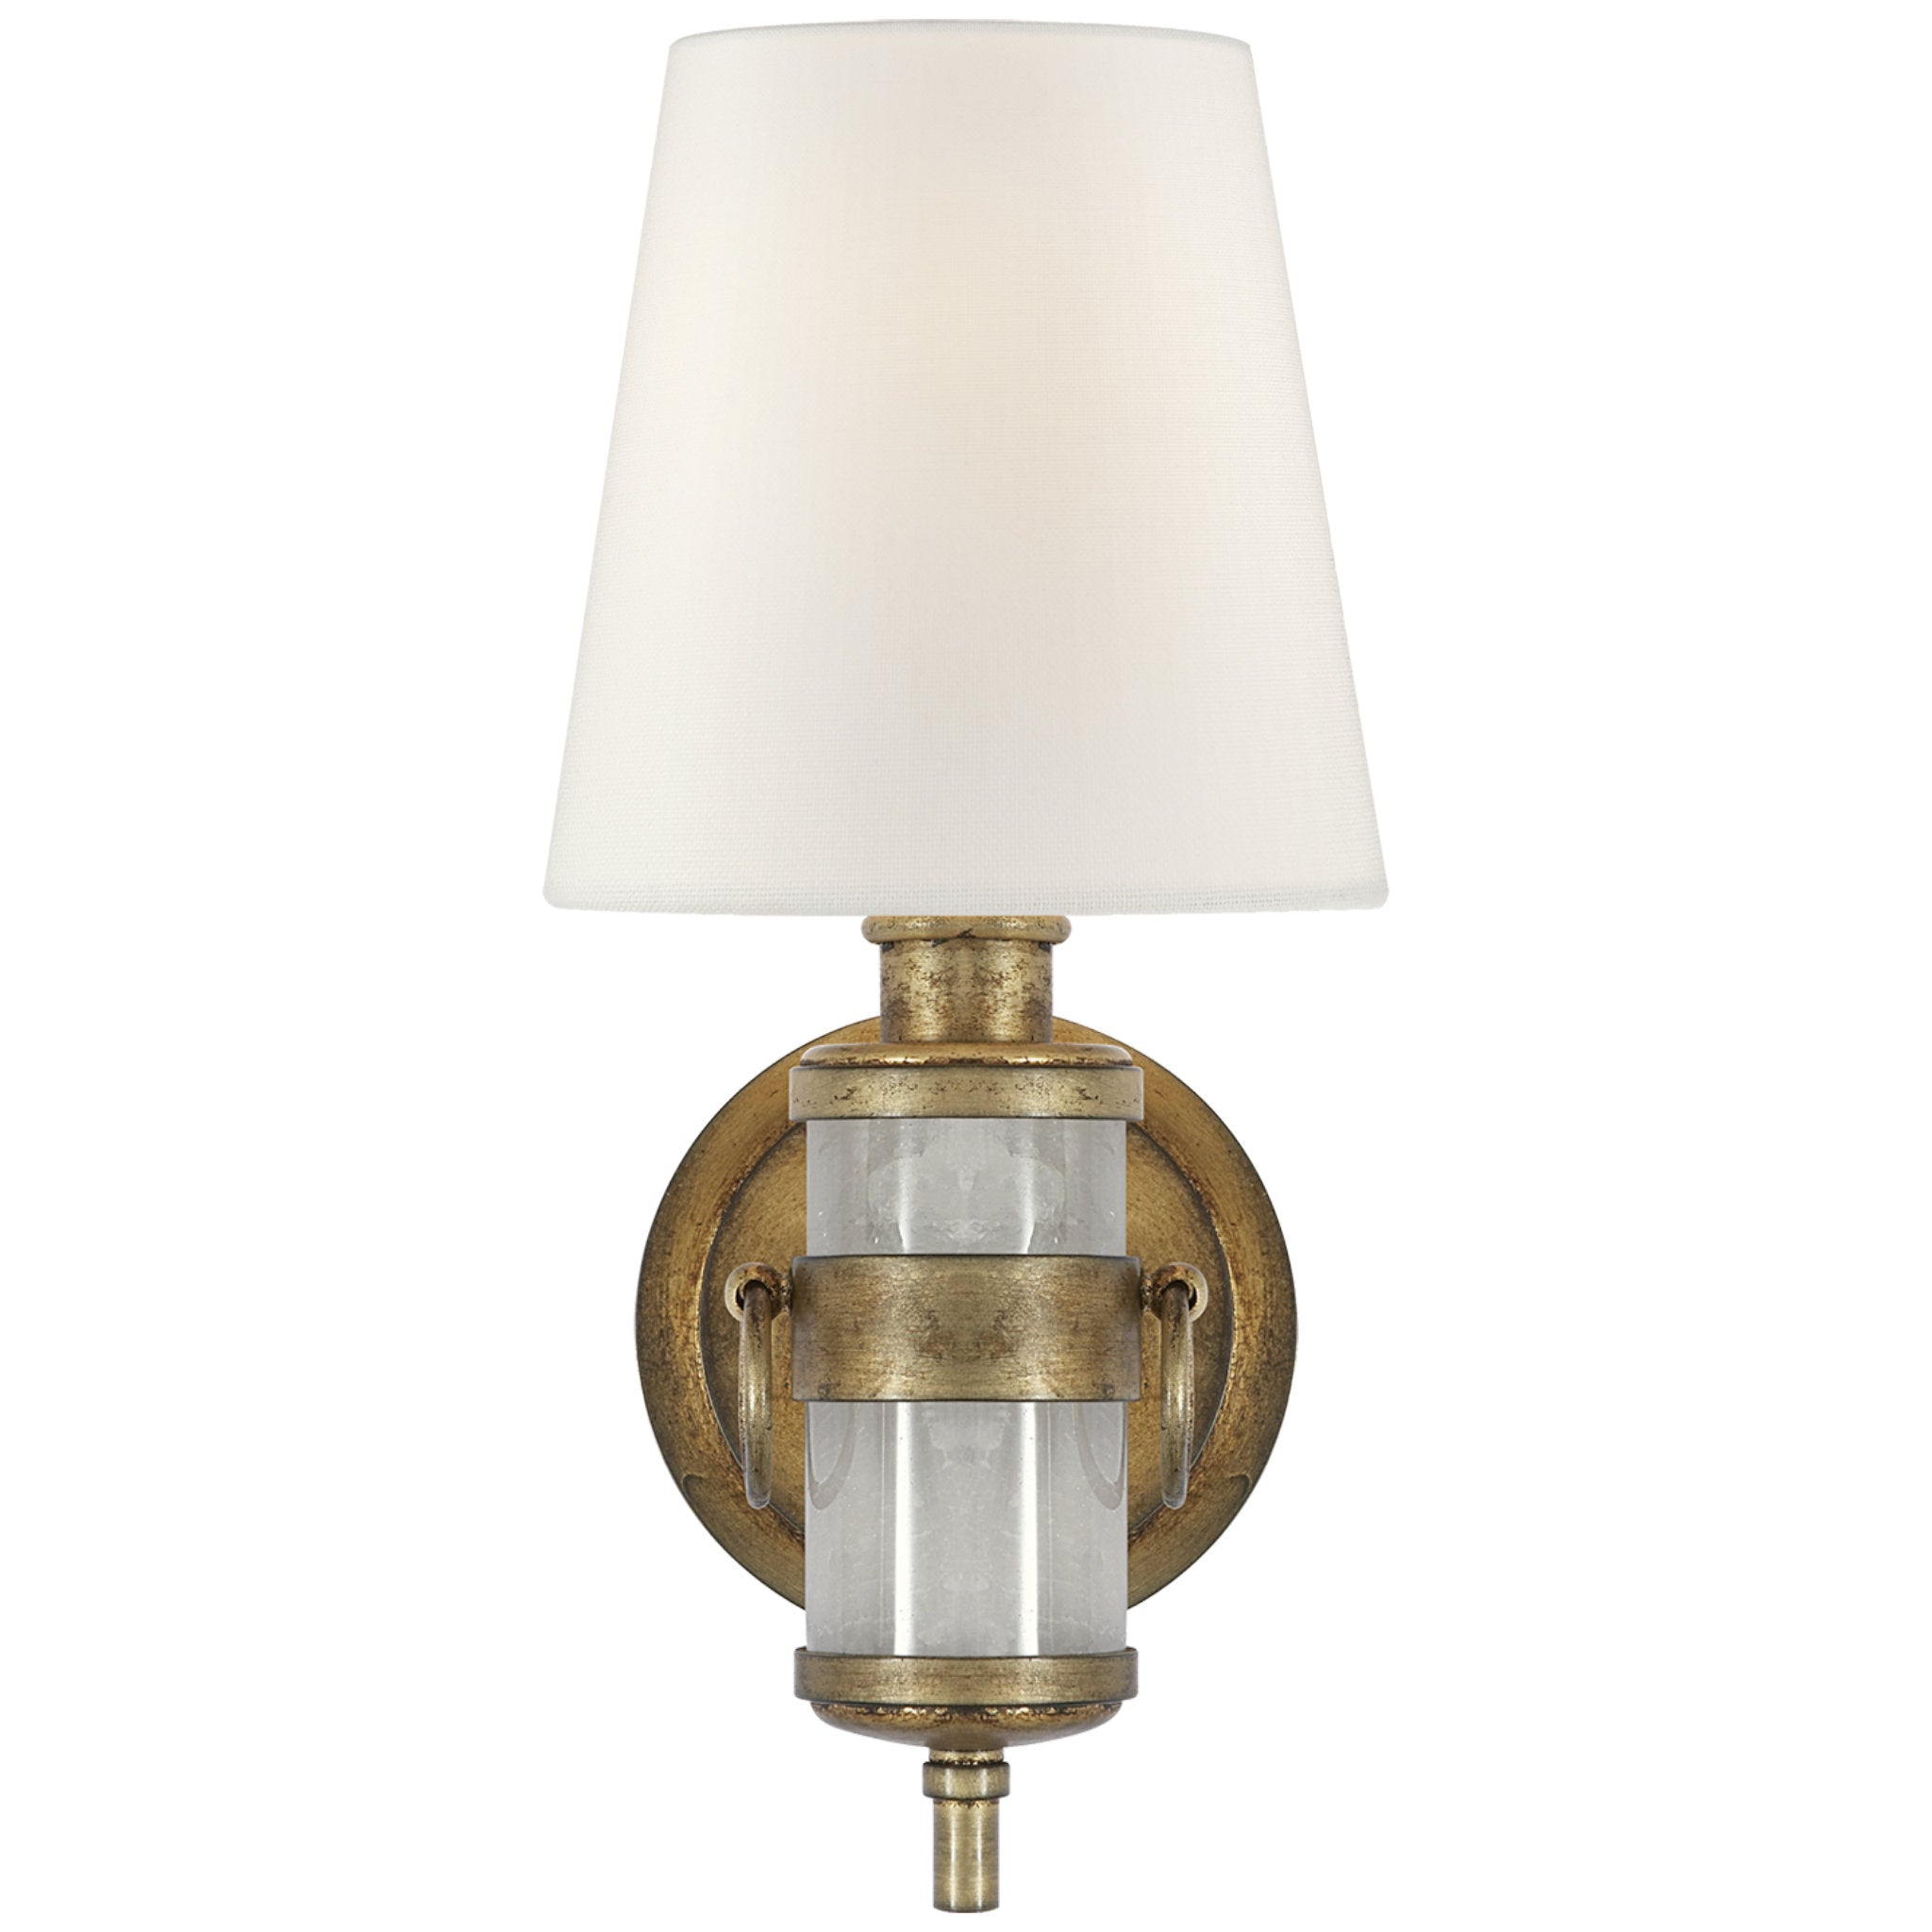 Thomas O'Brien Jonathan Sconce in Quartz with Linen Shade